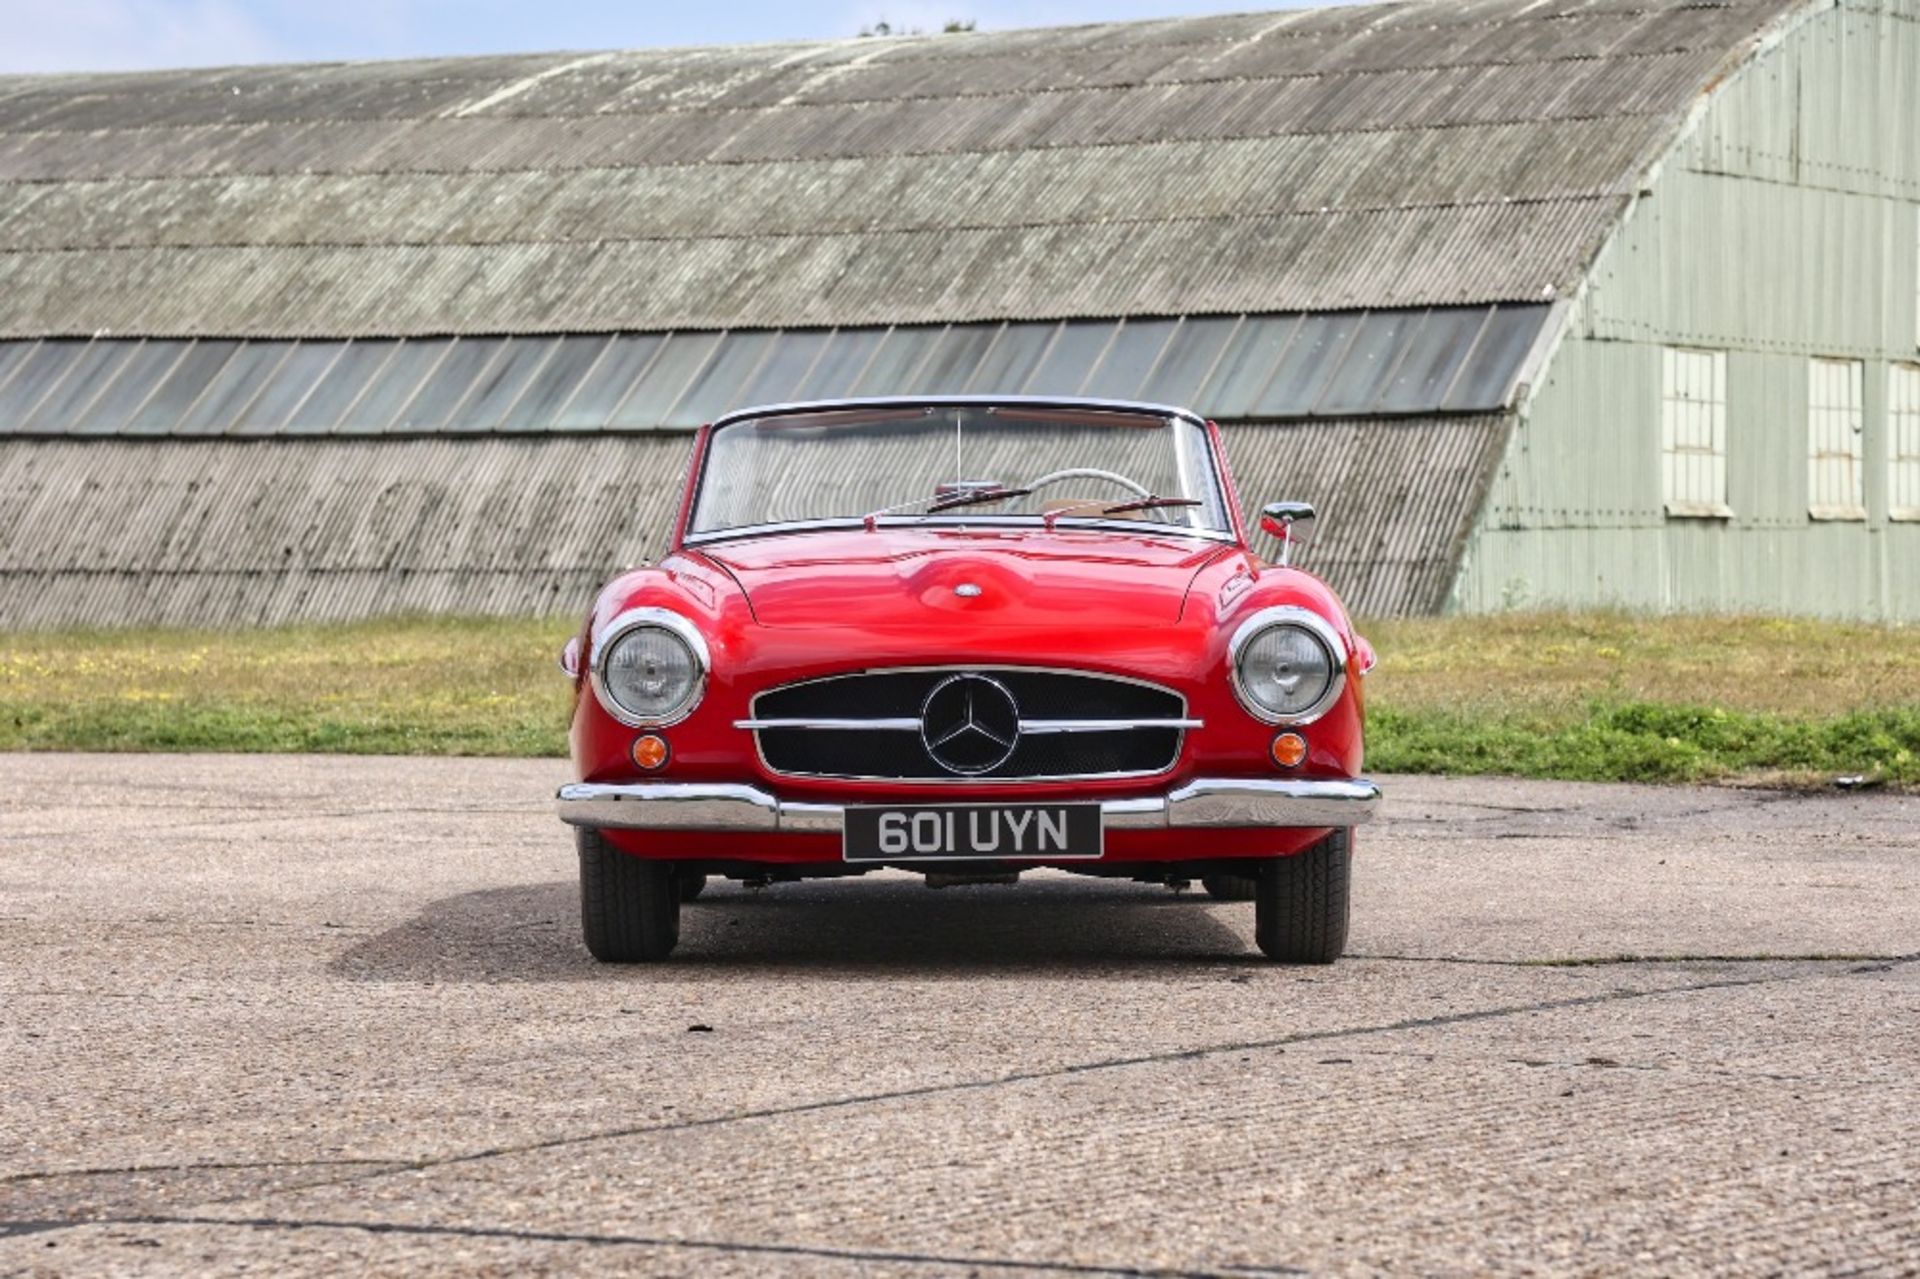 1958 MERCEDES-BENZ 190SL Registration Number: 601 UYN Chassis Number: 121.040.8500635 Recorded - Image 3 of 23